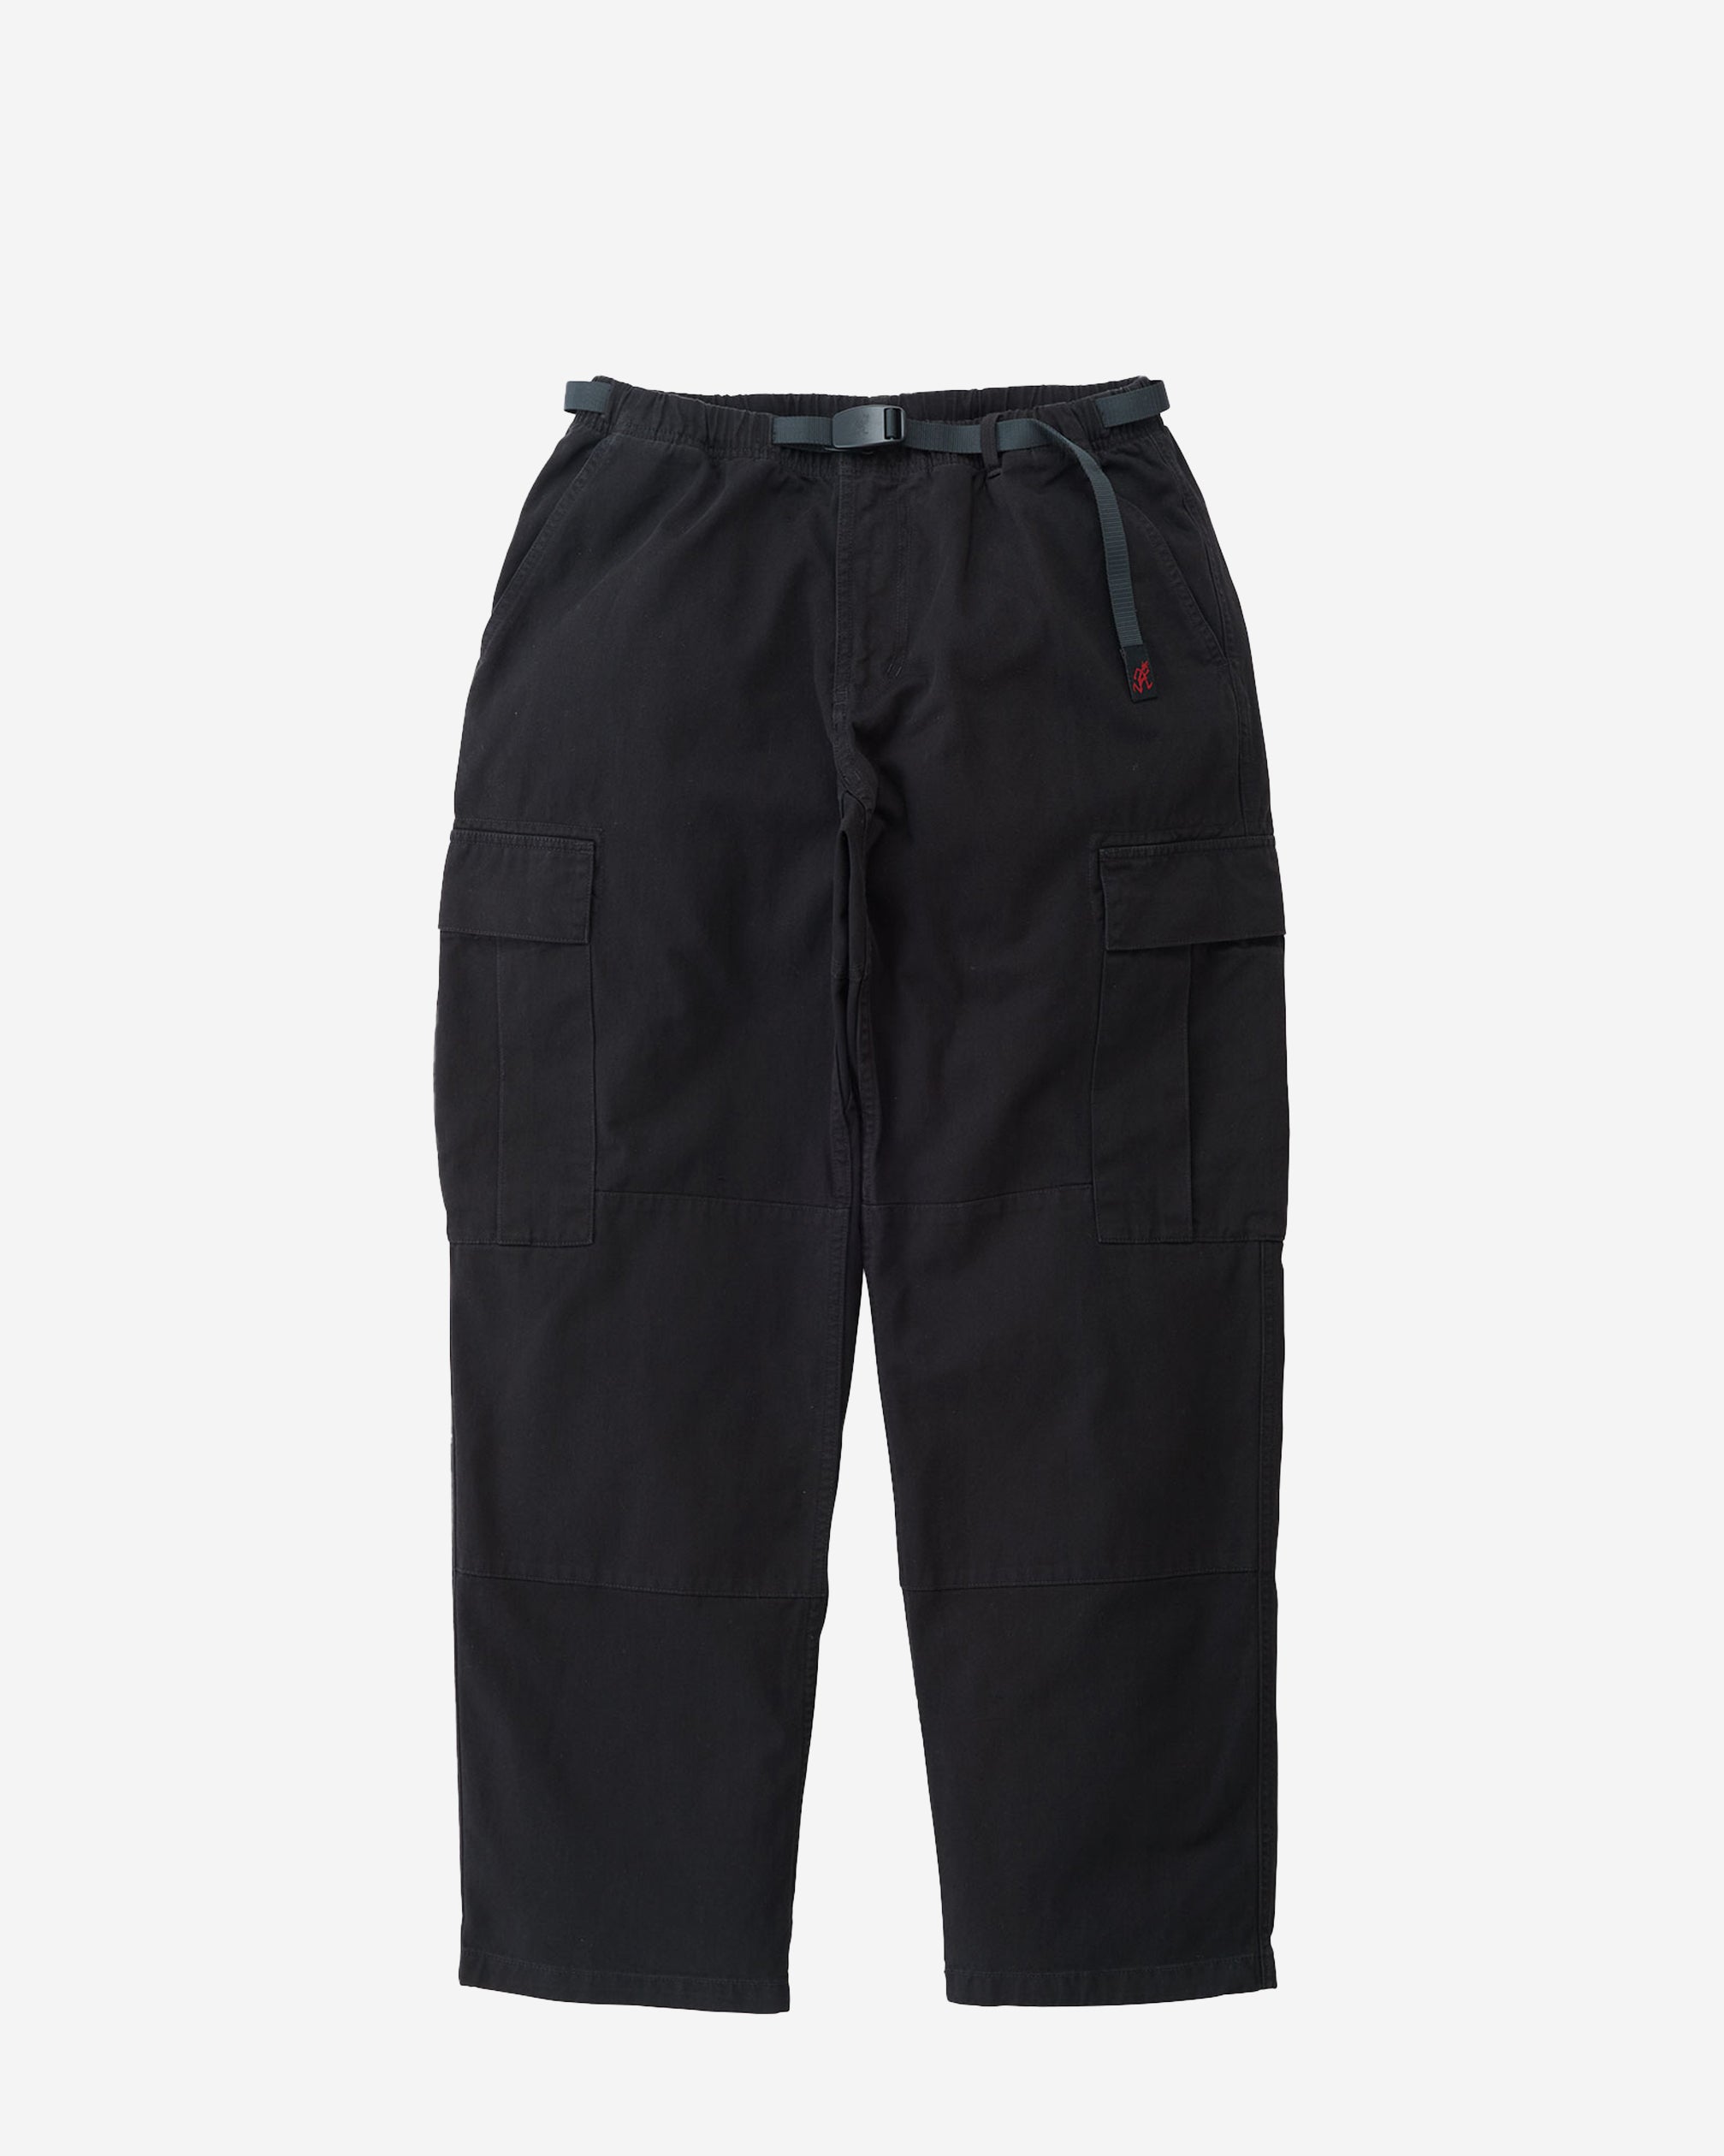 Two side pockets, two back pockets, and two lower thigh pockets Made with organic cotton stretch twill material - Cotton 98%, Polyurethane 2% Built in webbing belt Clean-line gusset crotch for style and mobility Inseam 31" While retaining functionality in the brand's rock-climbing scene roots, this outdoor lifestyle Cargo Pant by Gramicci has been tailored to fit the modern fashion appeal. Having just the right amount of roominess, the hem can be adjusted by a drawstring cord. Carabiners can be attached to the webbing belt on the left and right sides of the waist. Gramicci Cargo Pants have ample space and are loosely cut to hold maps, pens, or other hiking materials. Made with cotton twill which uses highly durable organic cotton that has resilience and elasticity and can withstand vigorous activity. Dyed to create a distinct vibe.